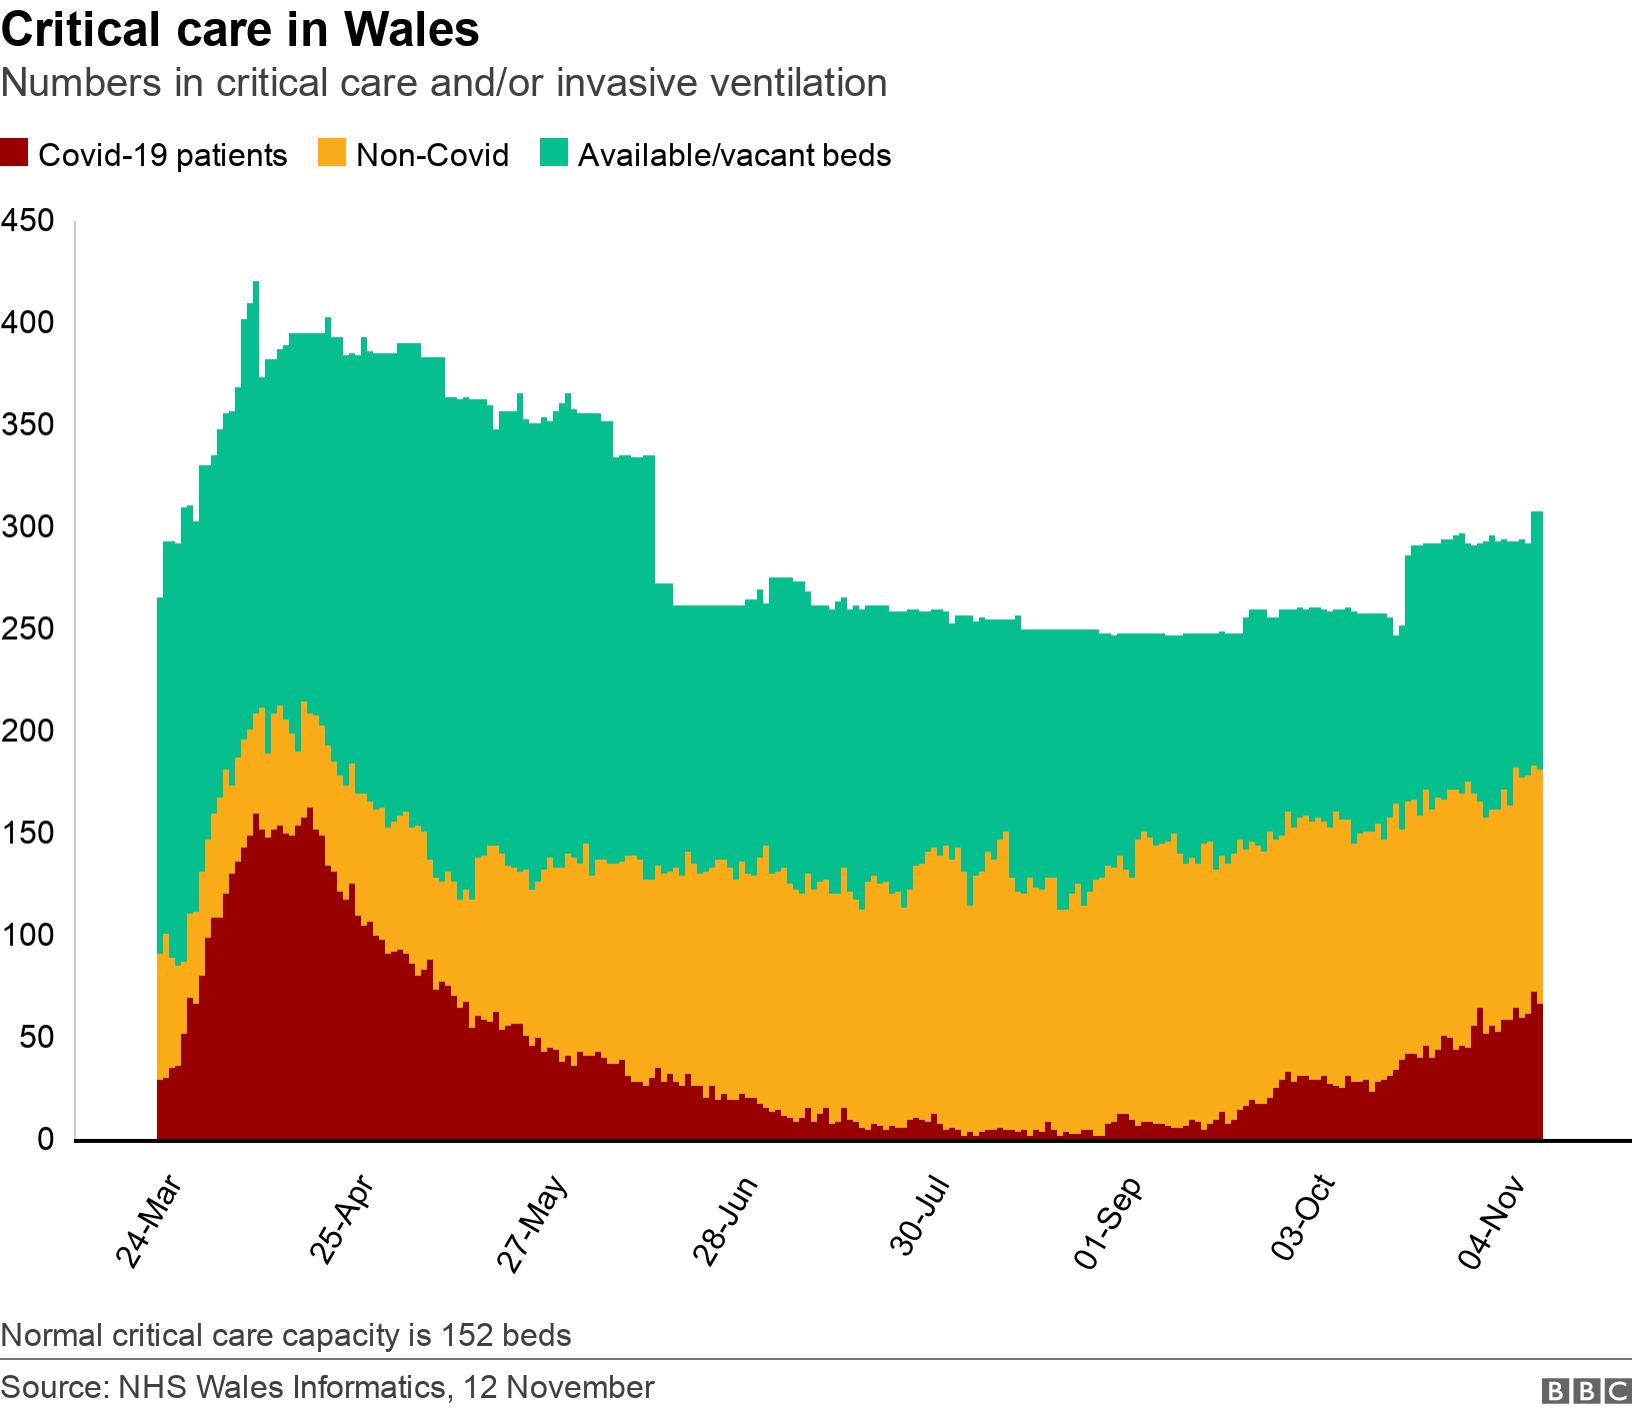 Critical care in Wales. Numbers in critical care and/or invasive ventilation. Normal critical care capacity is 152 beds.